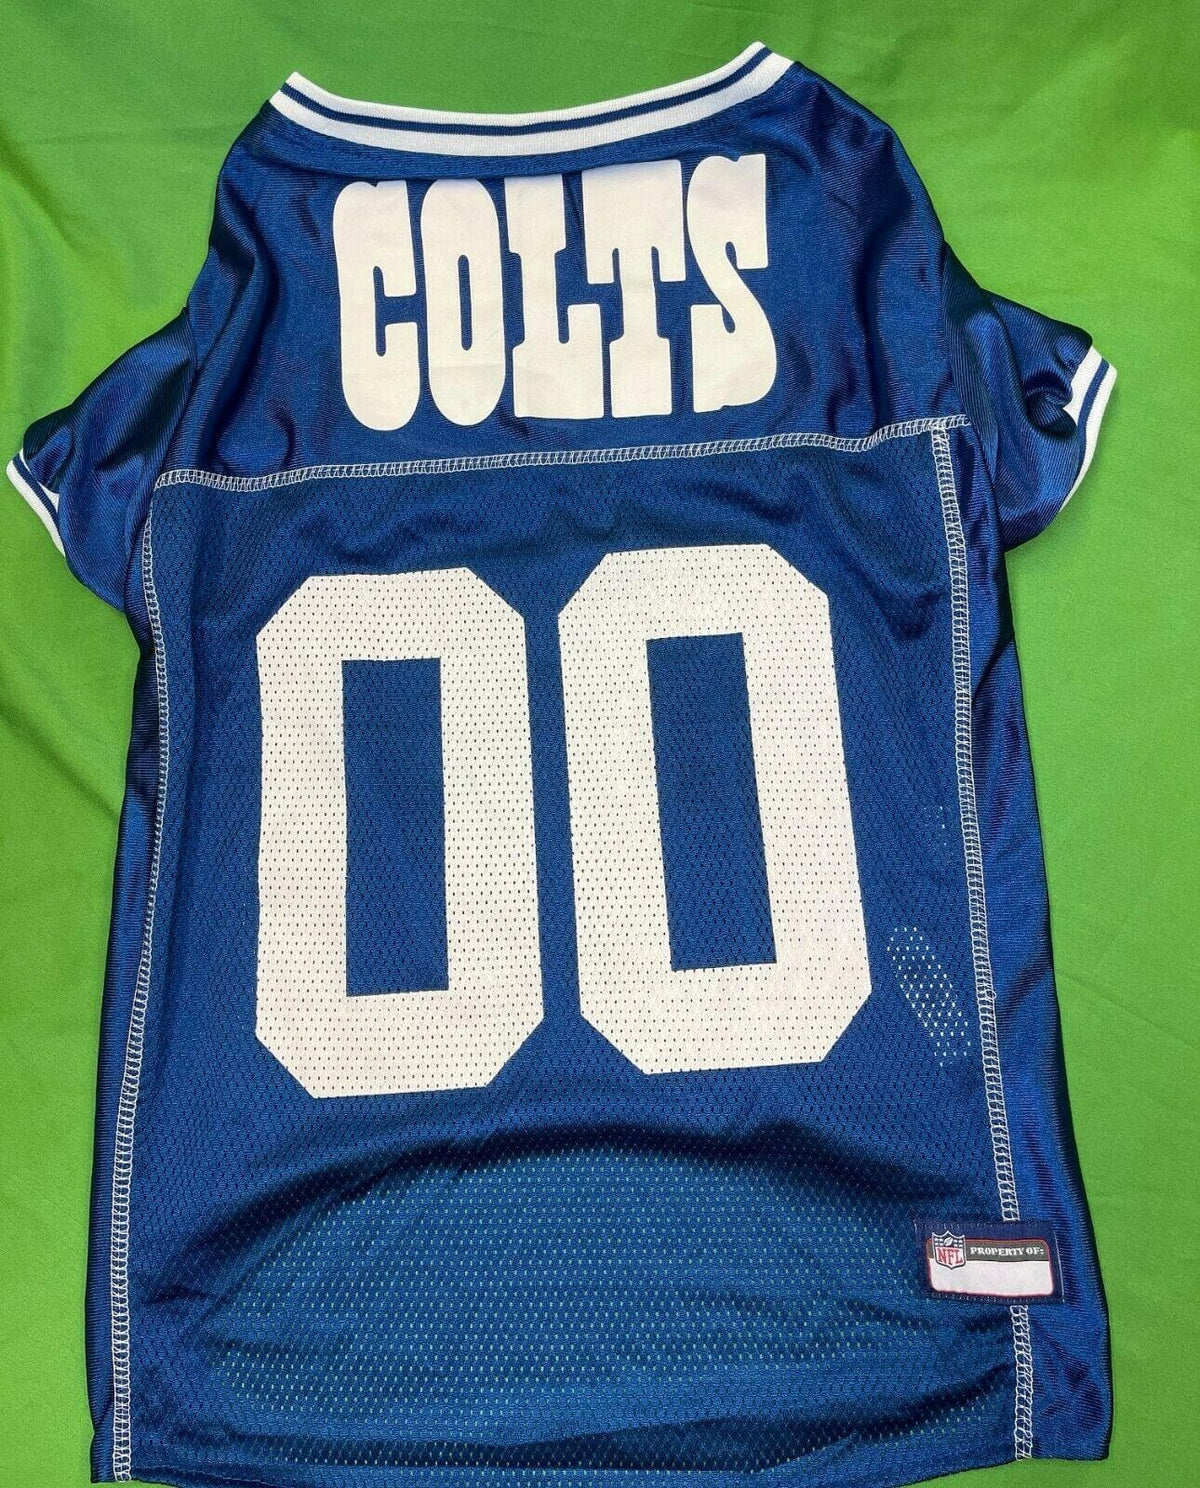 NFL Indianapolis Colts #00 Dog Jersey Size 2X-Large